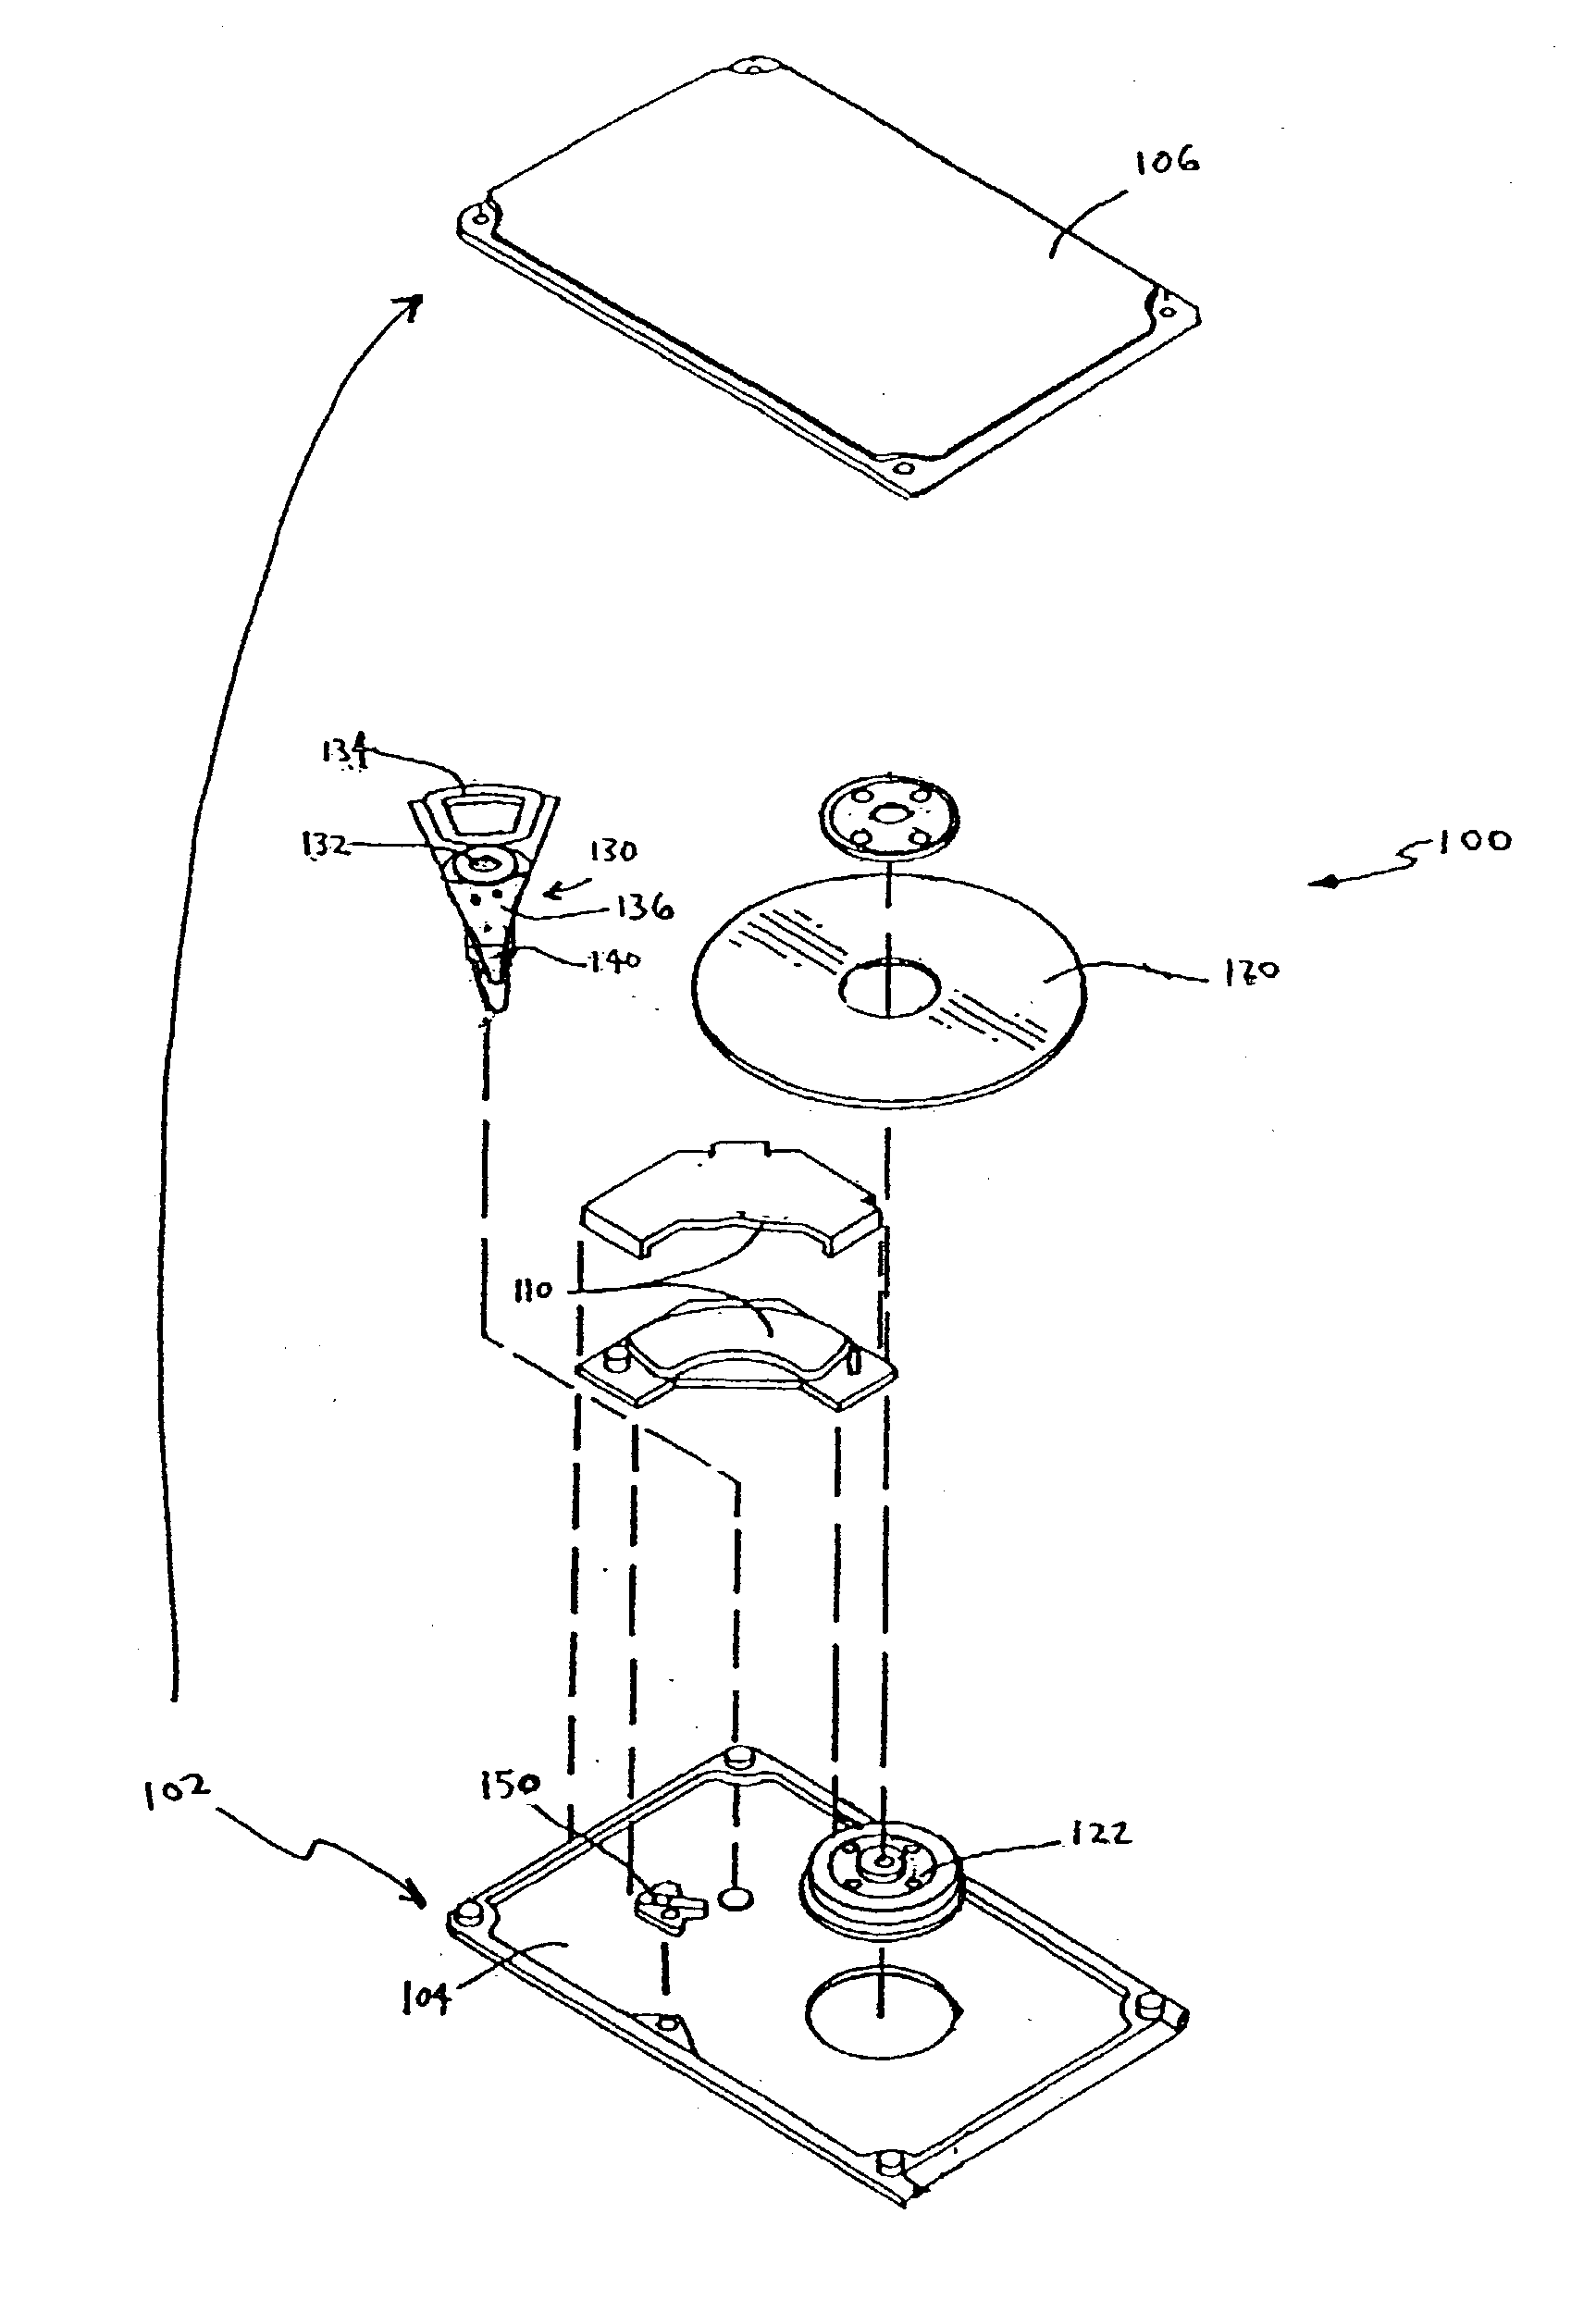 Methods for assembling or reworking a rotary actuator assembly for a media data storage device